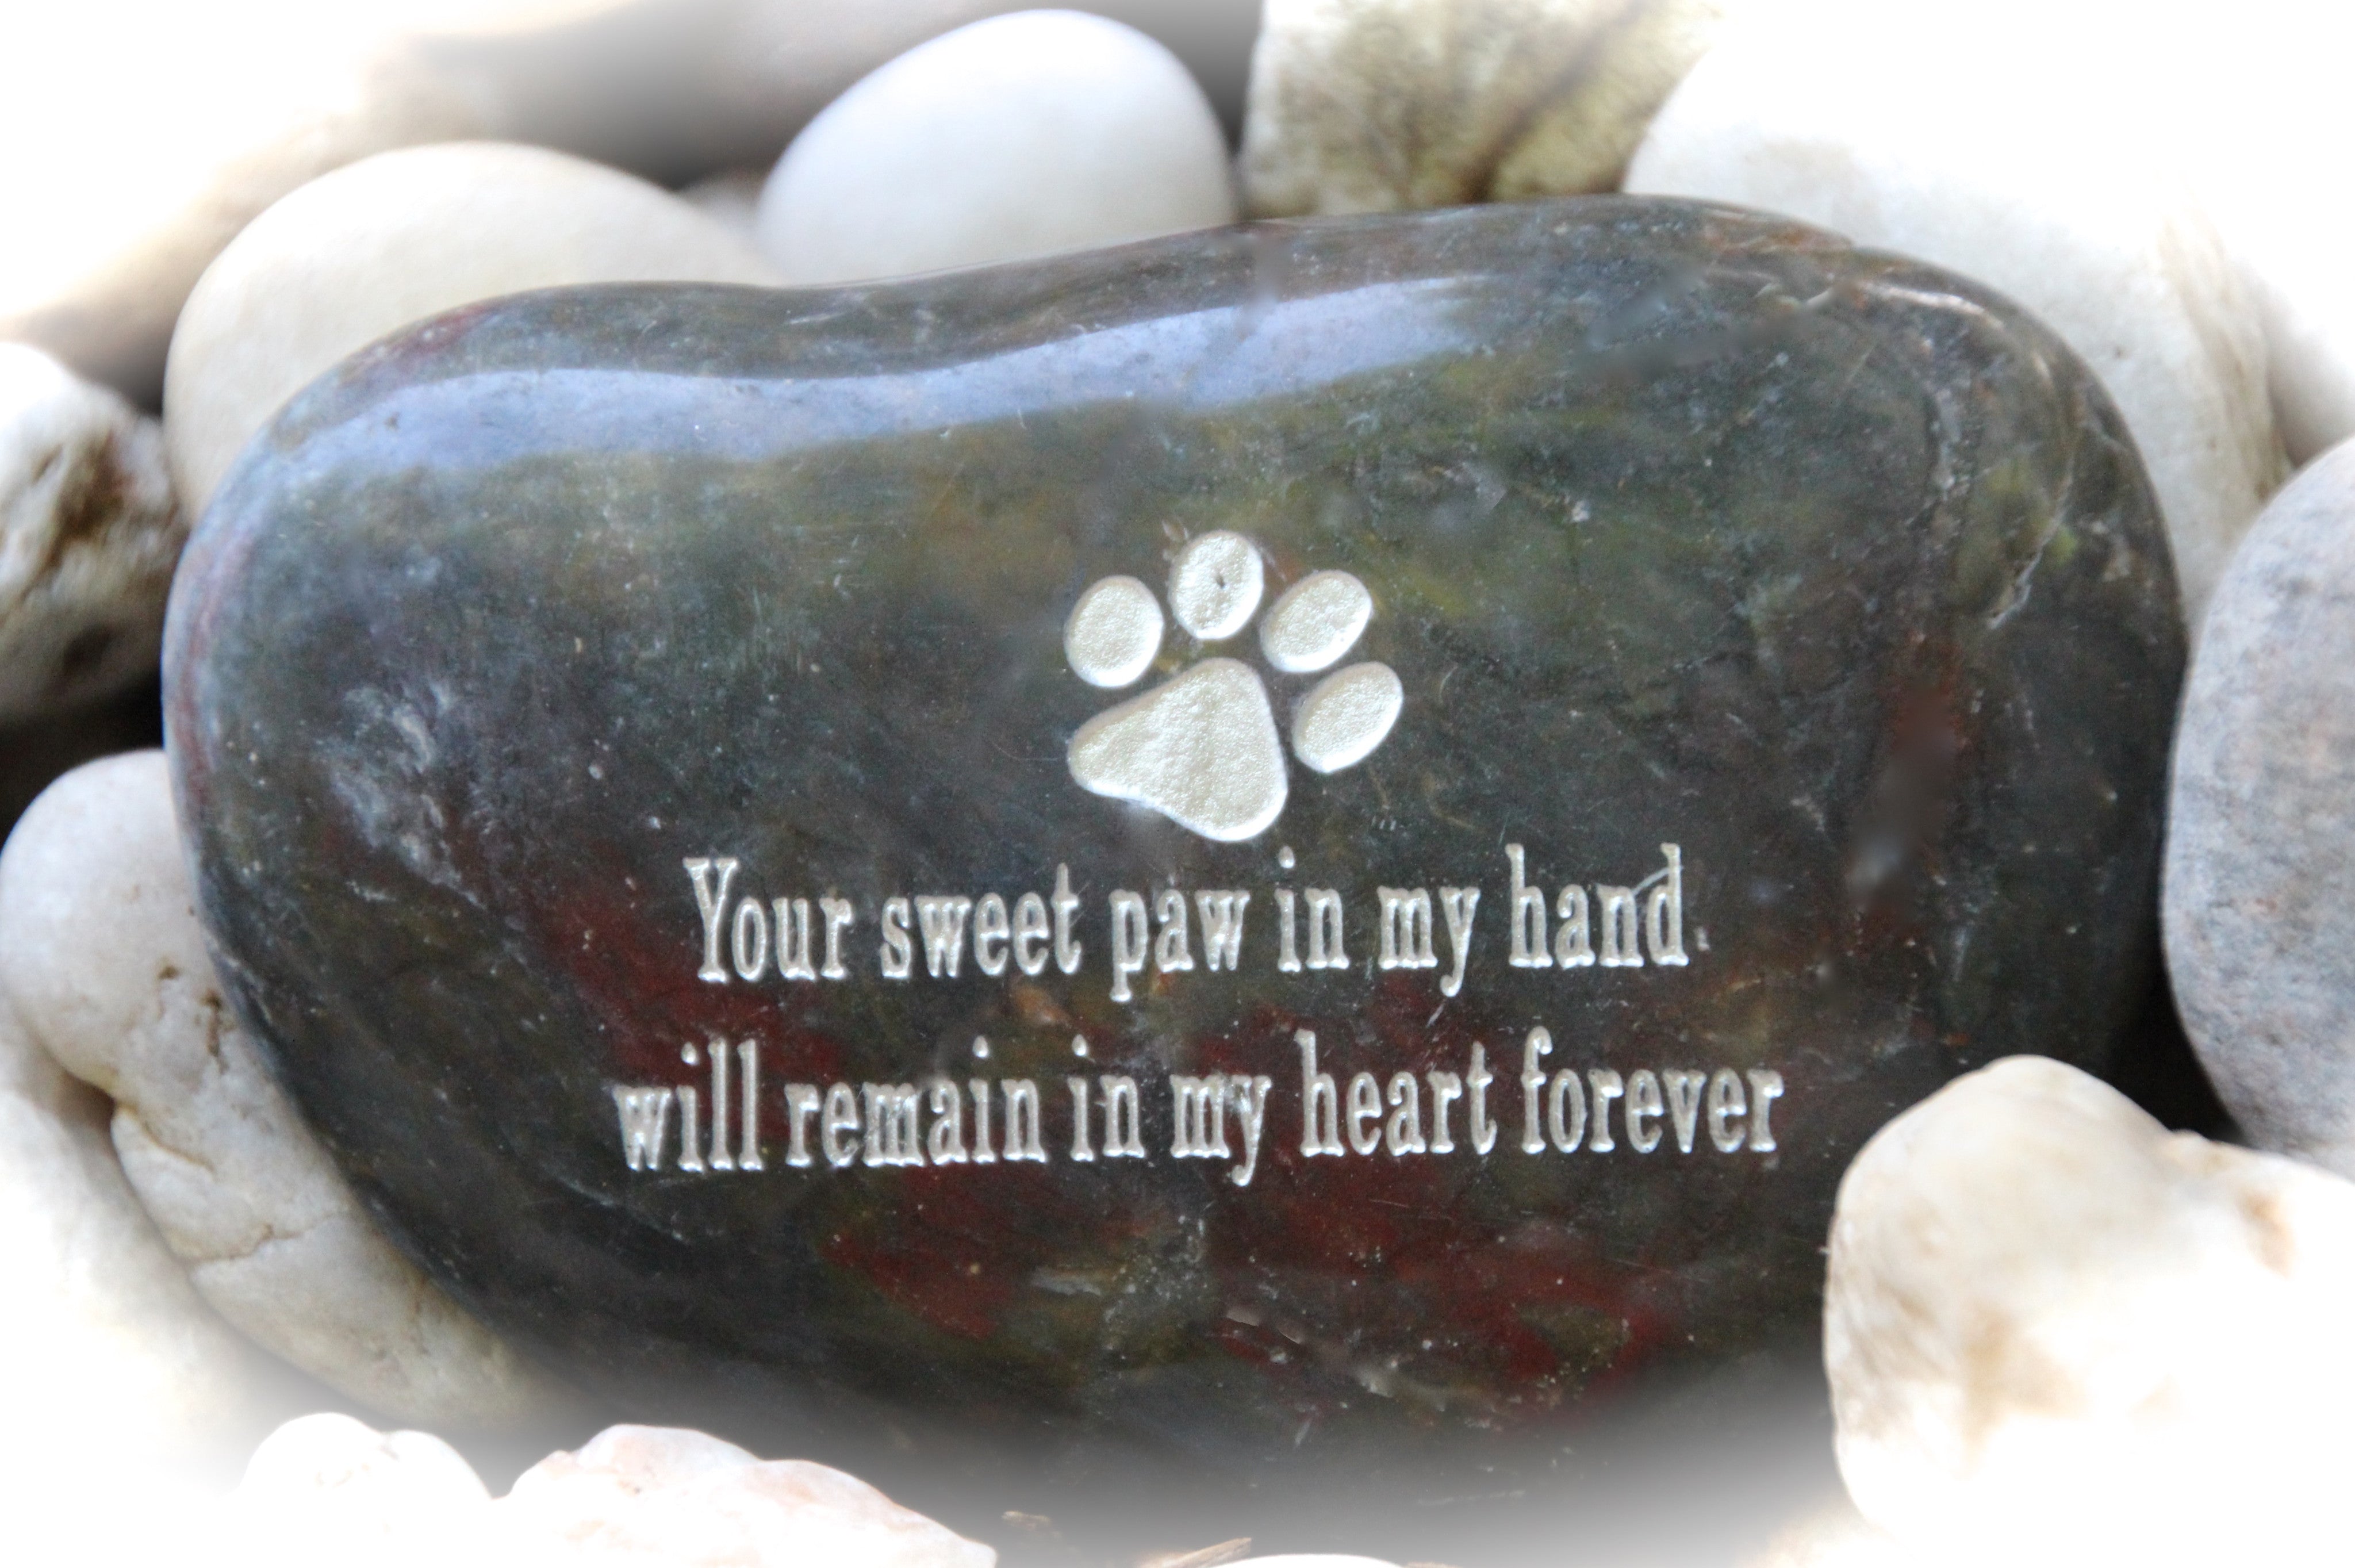 Your_Sweet_Paw_In_My_Hand_Will_Remain_In_My_Heart_Forever_Engraved_Inspirational_Stone_Karmic_Stones13